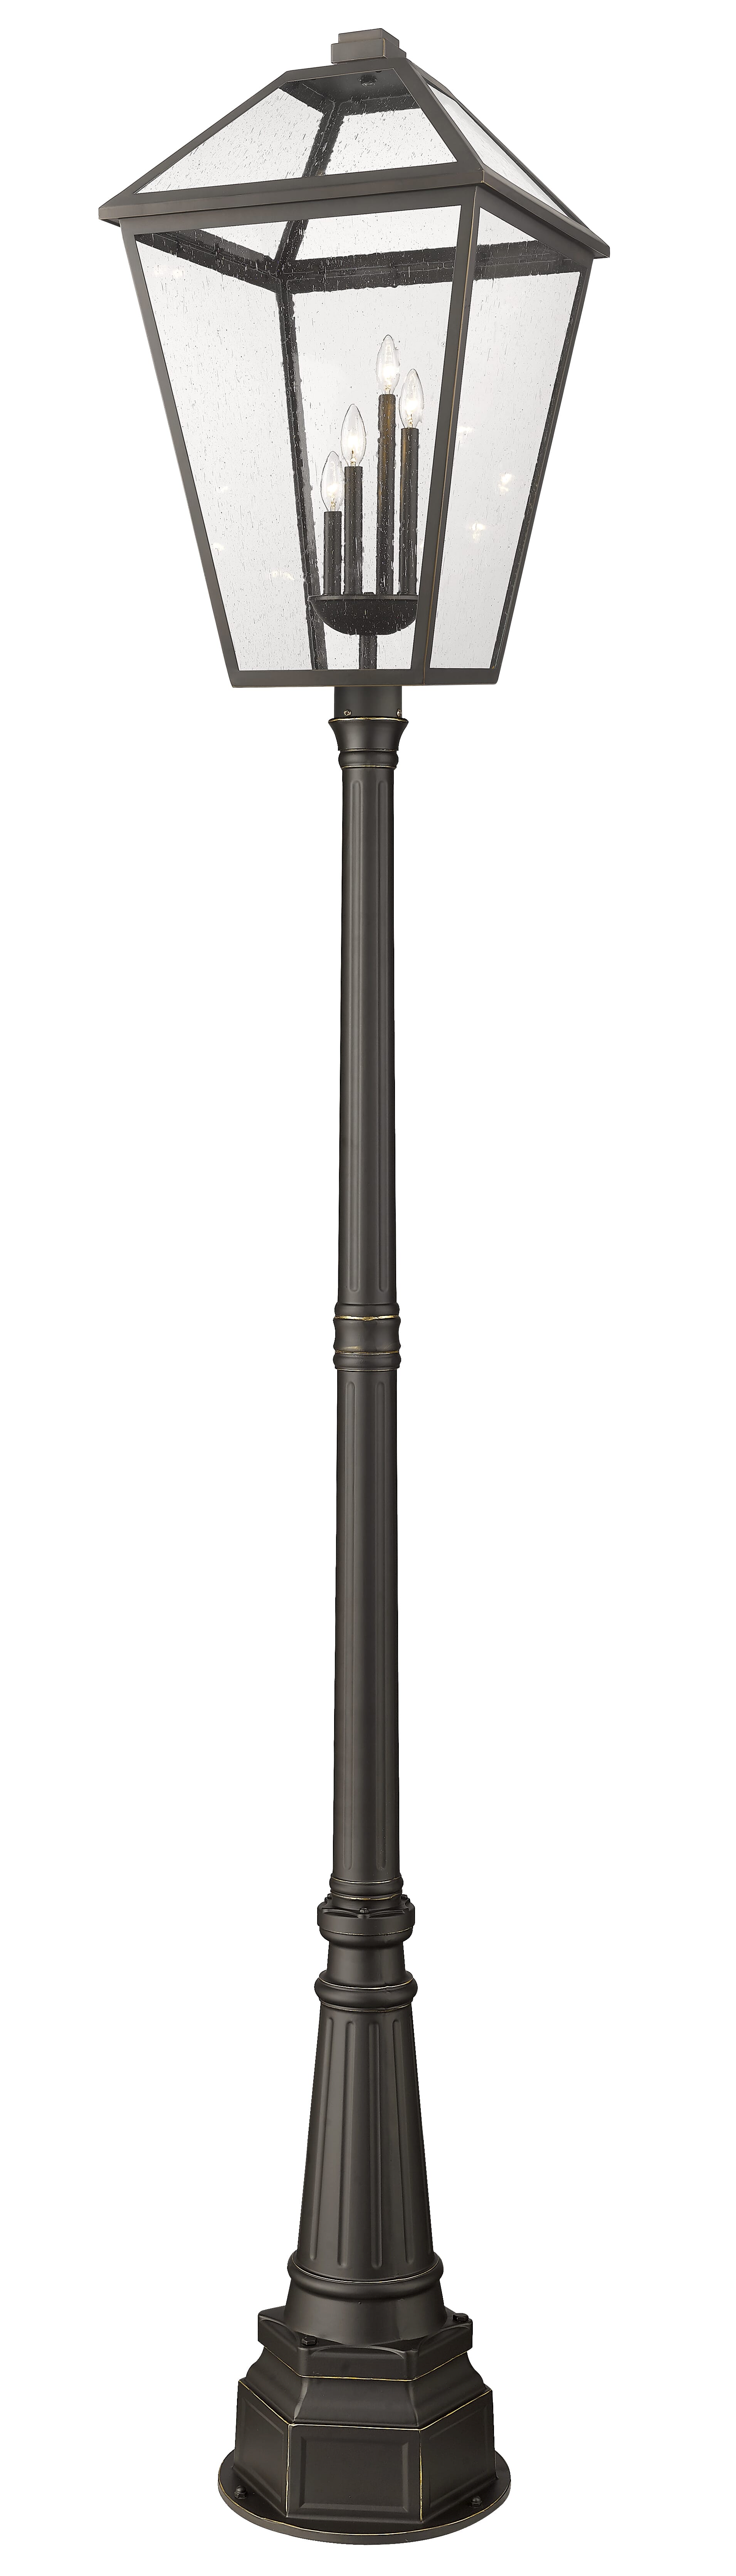 Talbot 4-Light Outdoor Post Mounted Fixture Light In Oil Rubbed Bronze